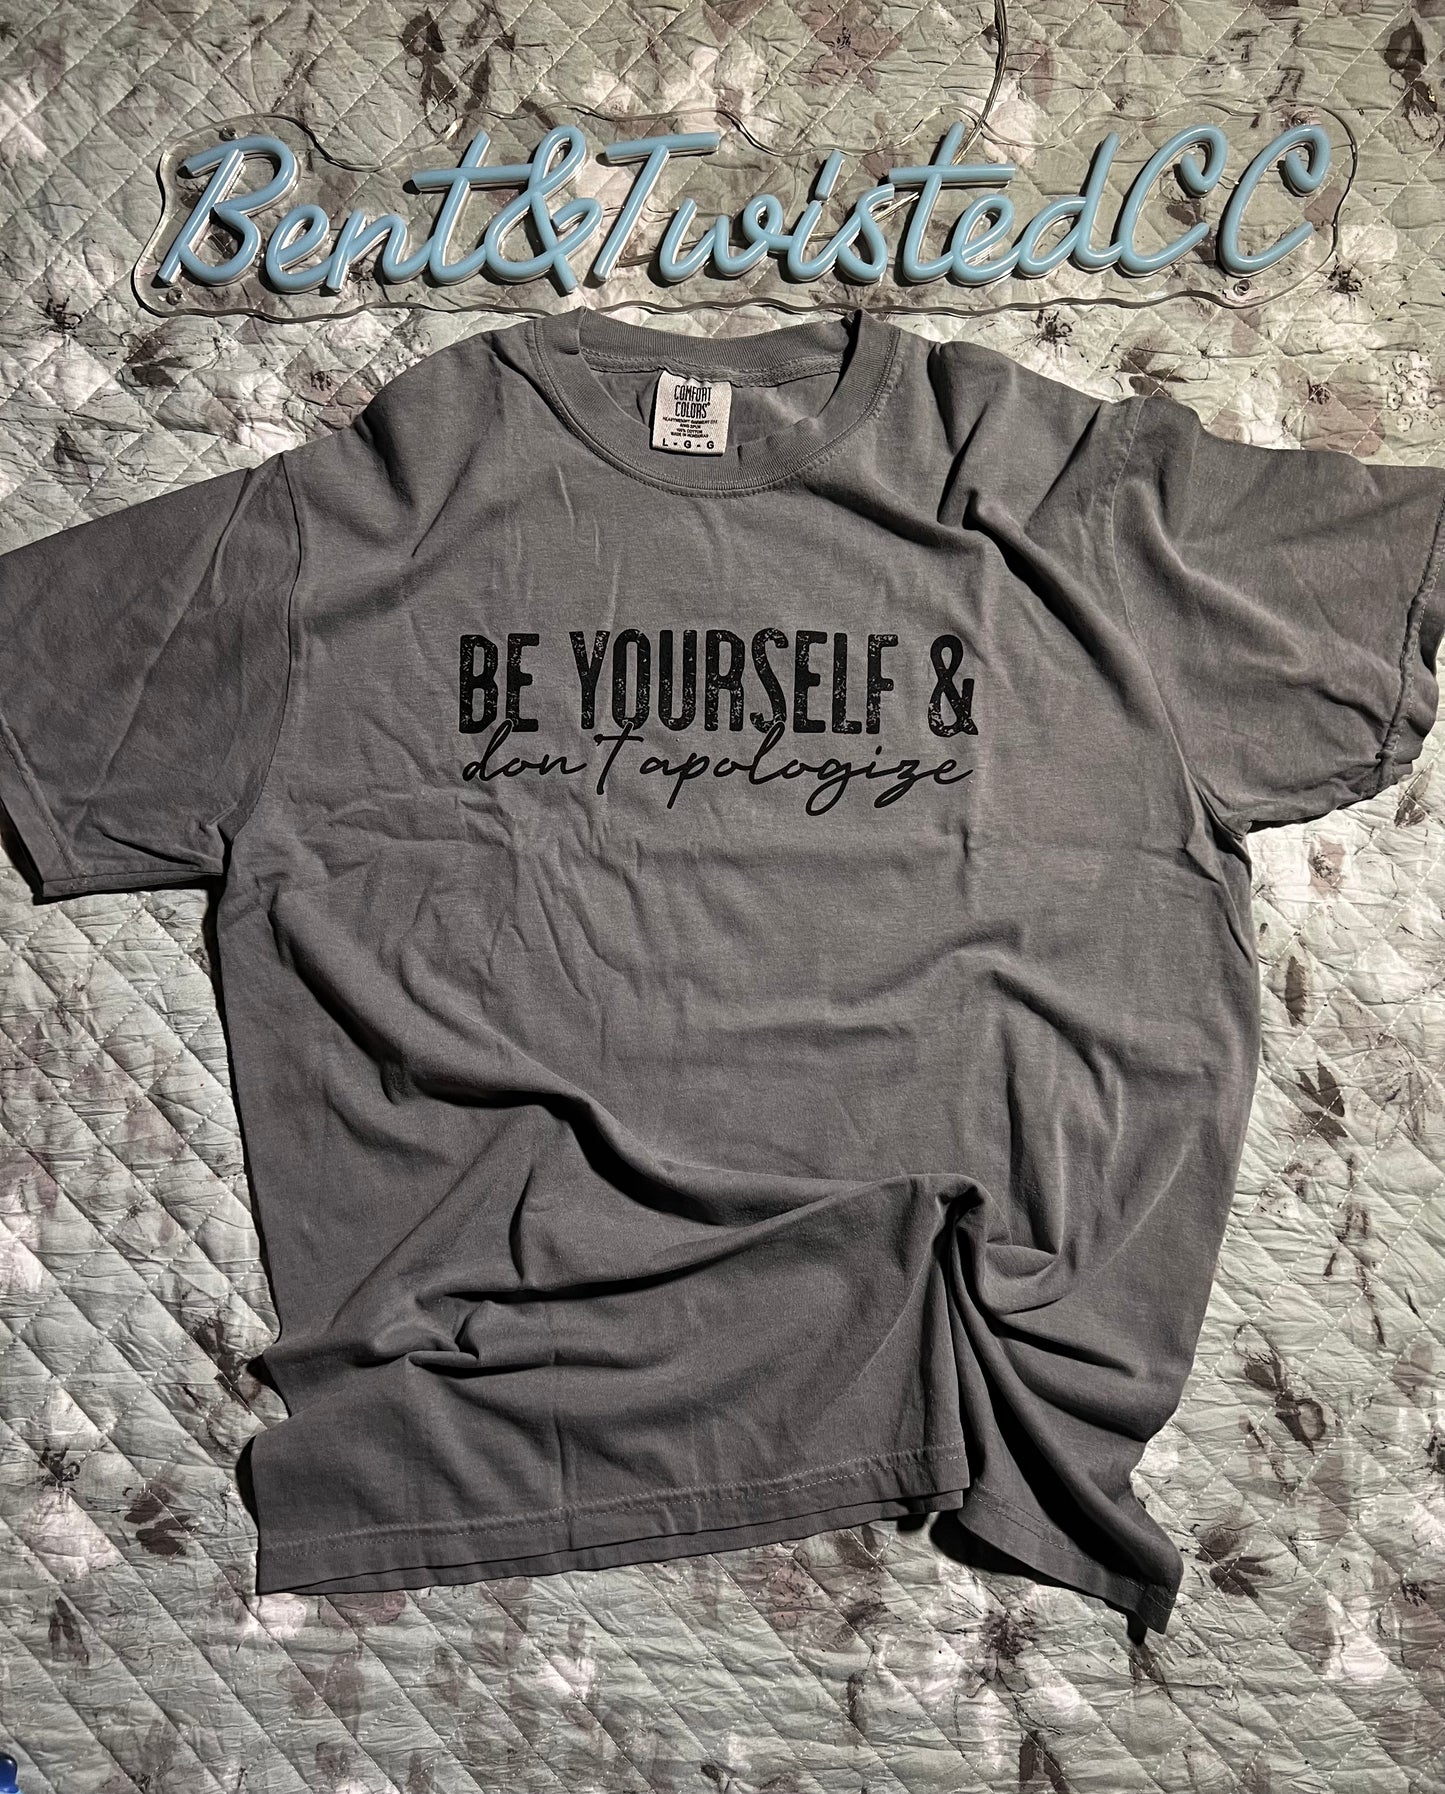 Be yourself & don’t apologize CC tee